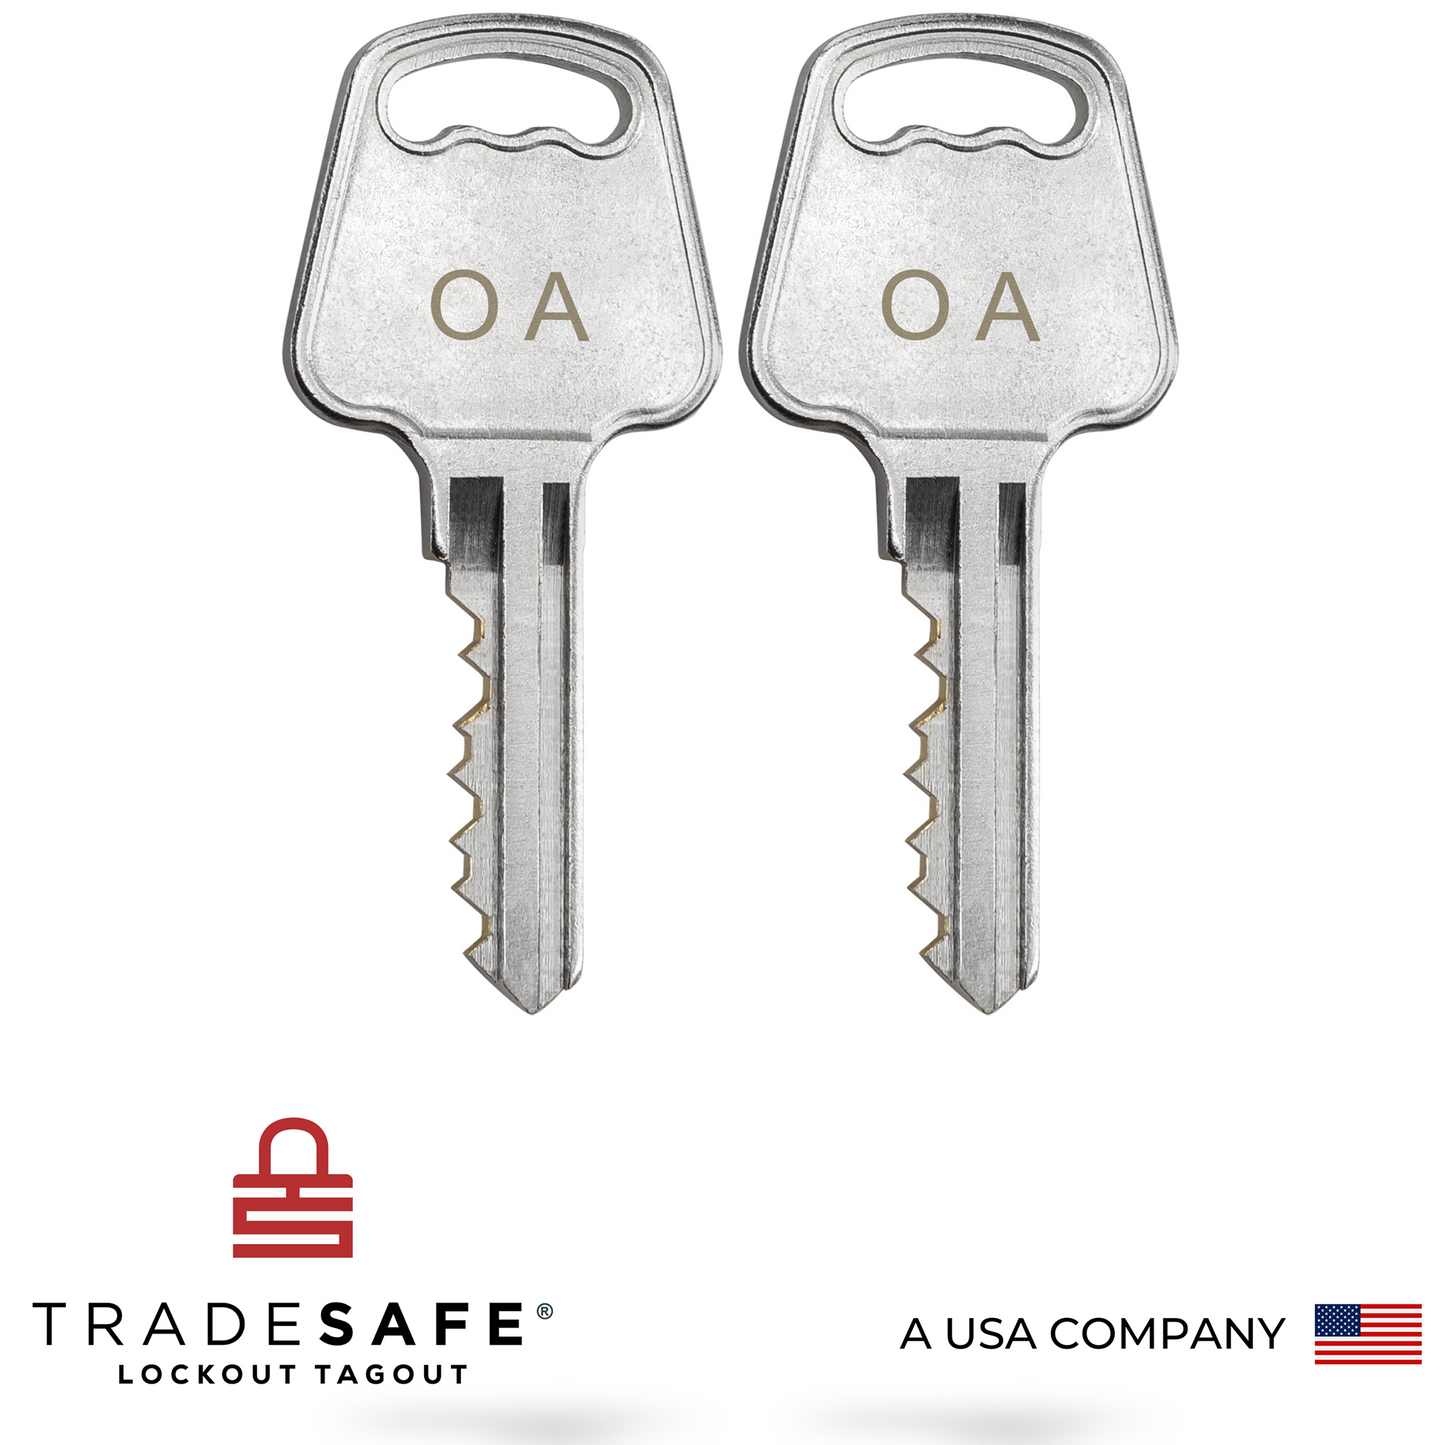 two keys, each with the letter code OA